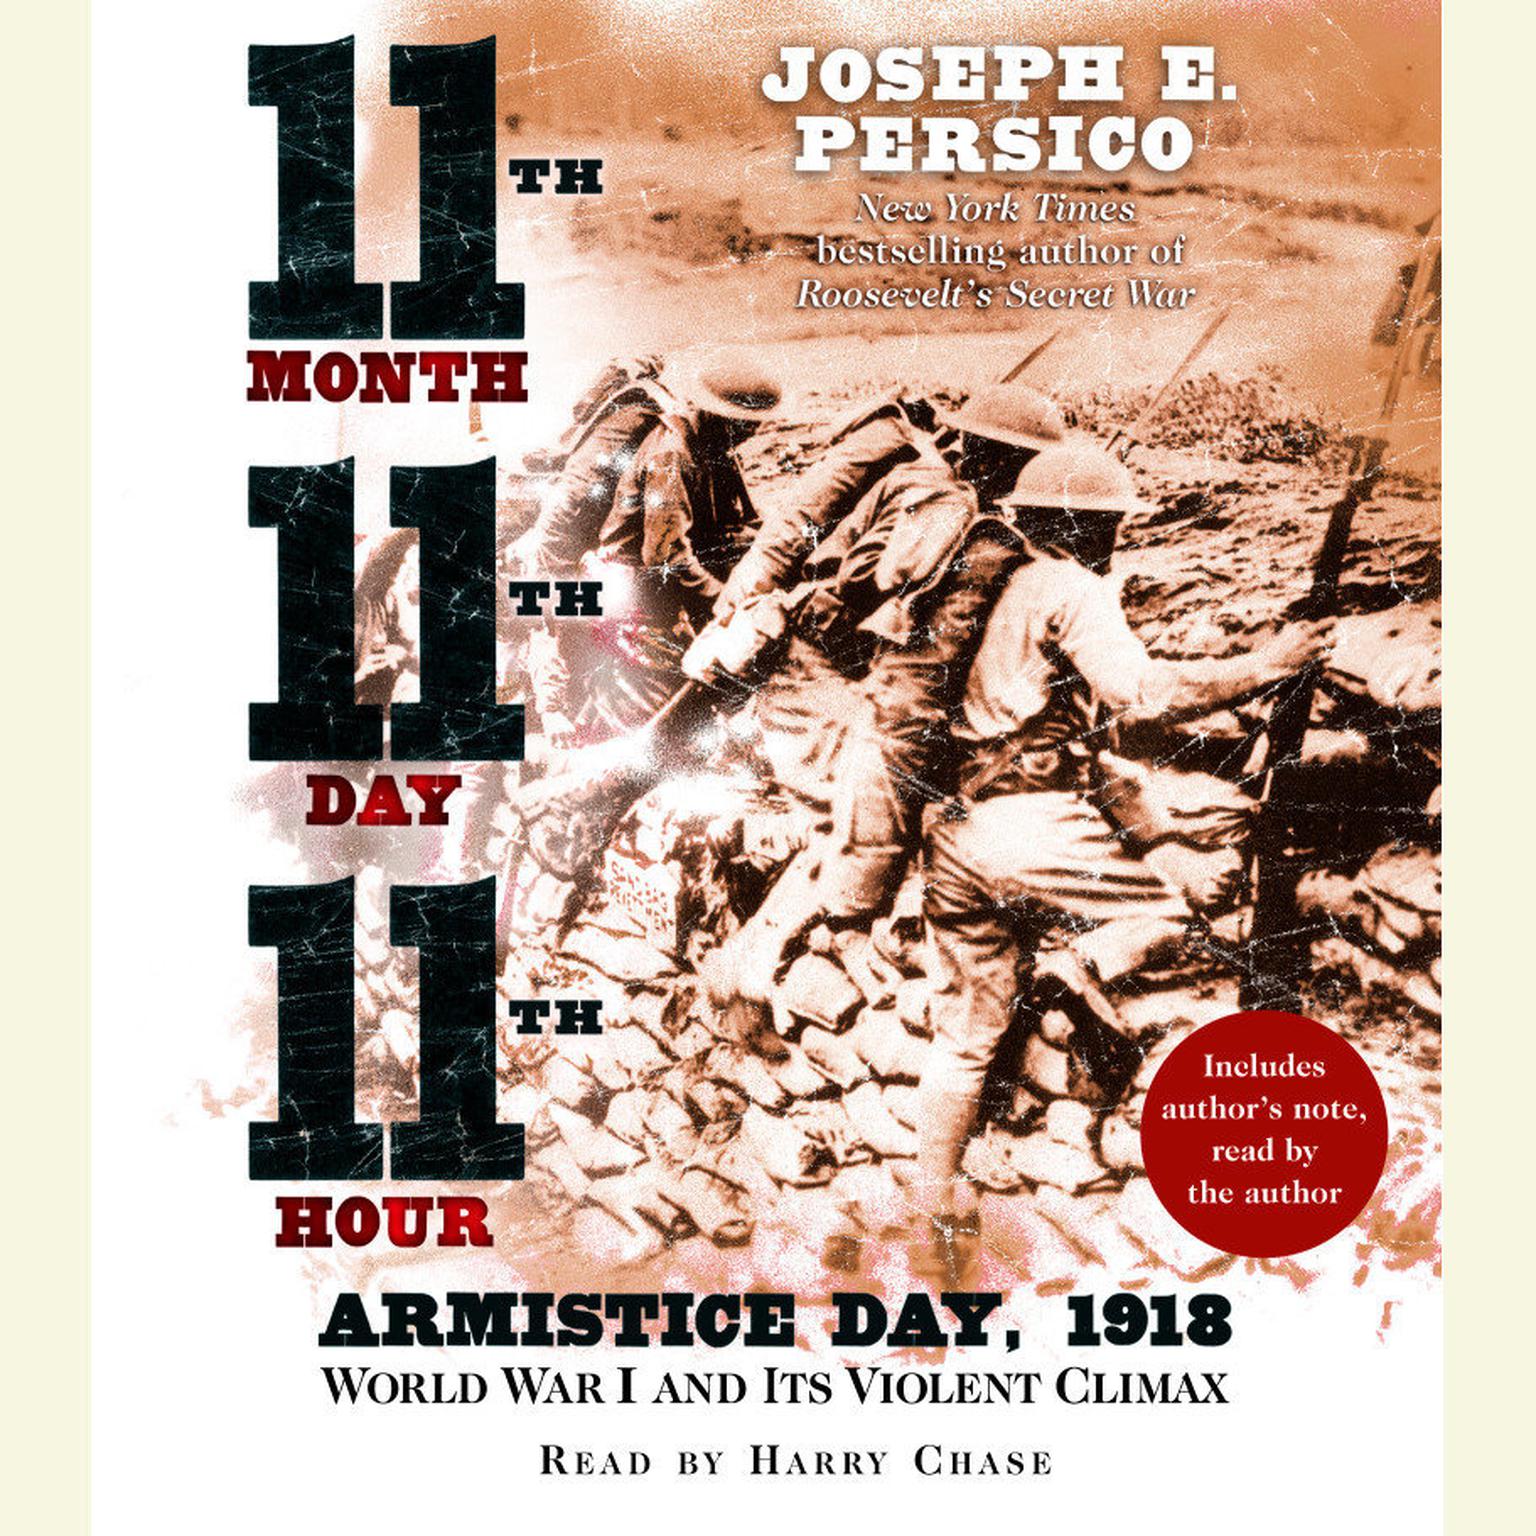 Eleventh Month, Eleventh Day, Eleventh Hour: Armistice Day, 1918 World War I and Its Violent Climax Audiobook, by Joseph E. Persico